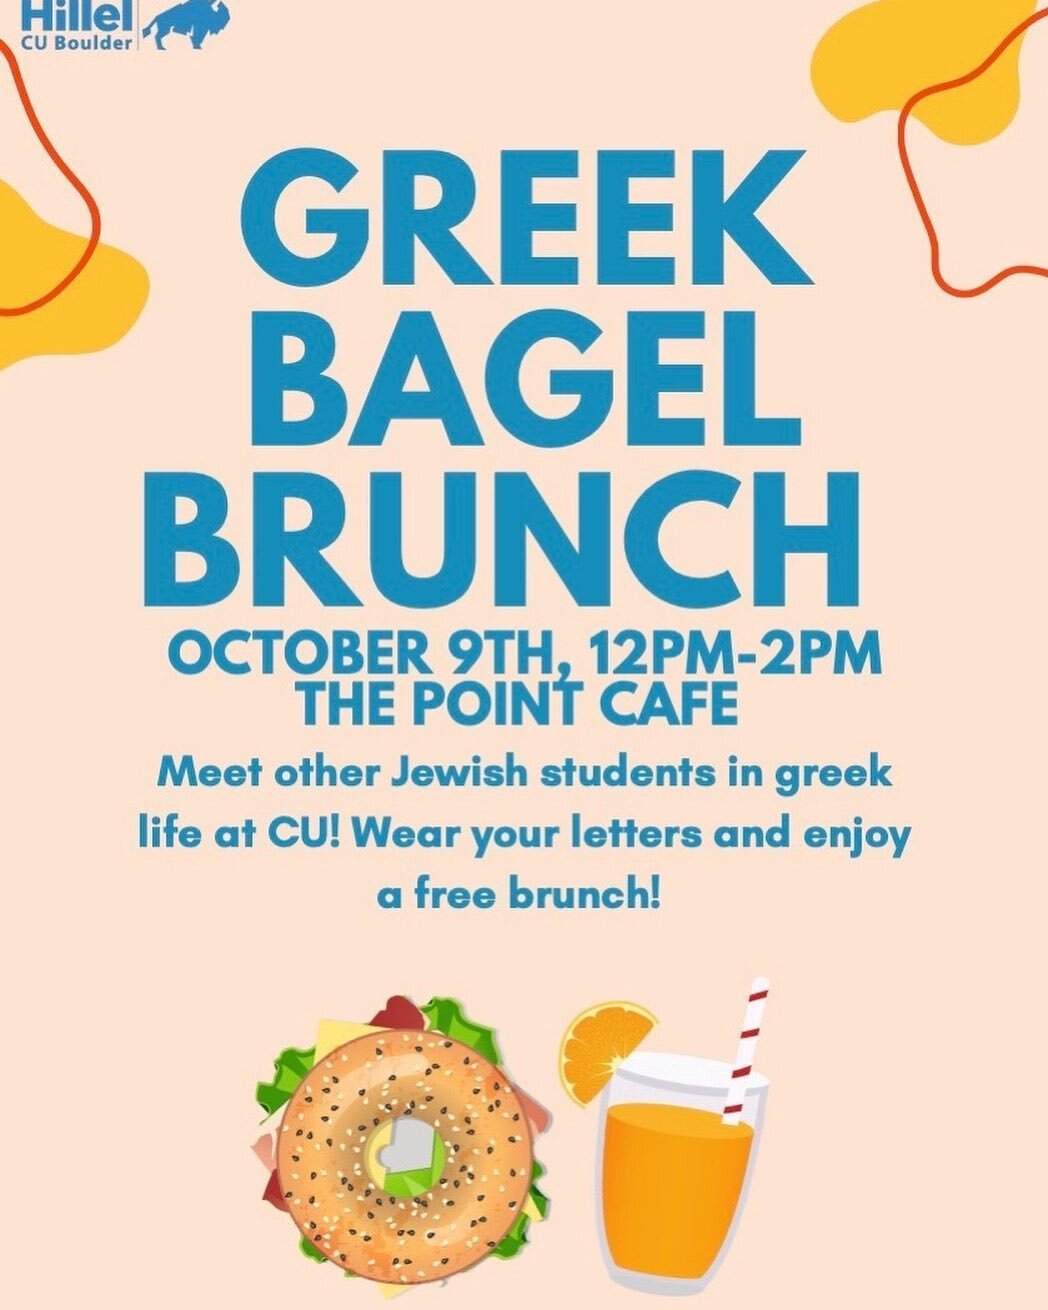 If you are in Greek life and want to meet other Jewish students, join us on Sunday for Bagel Brunch at Point Cafe!!